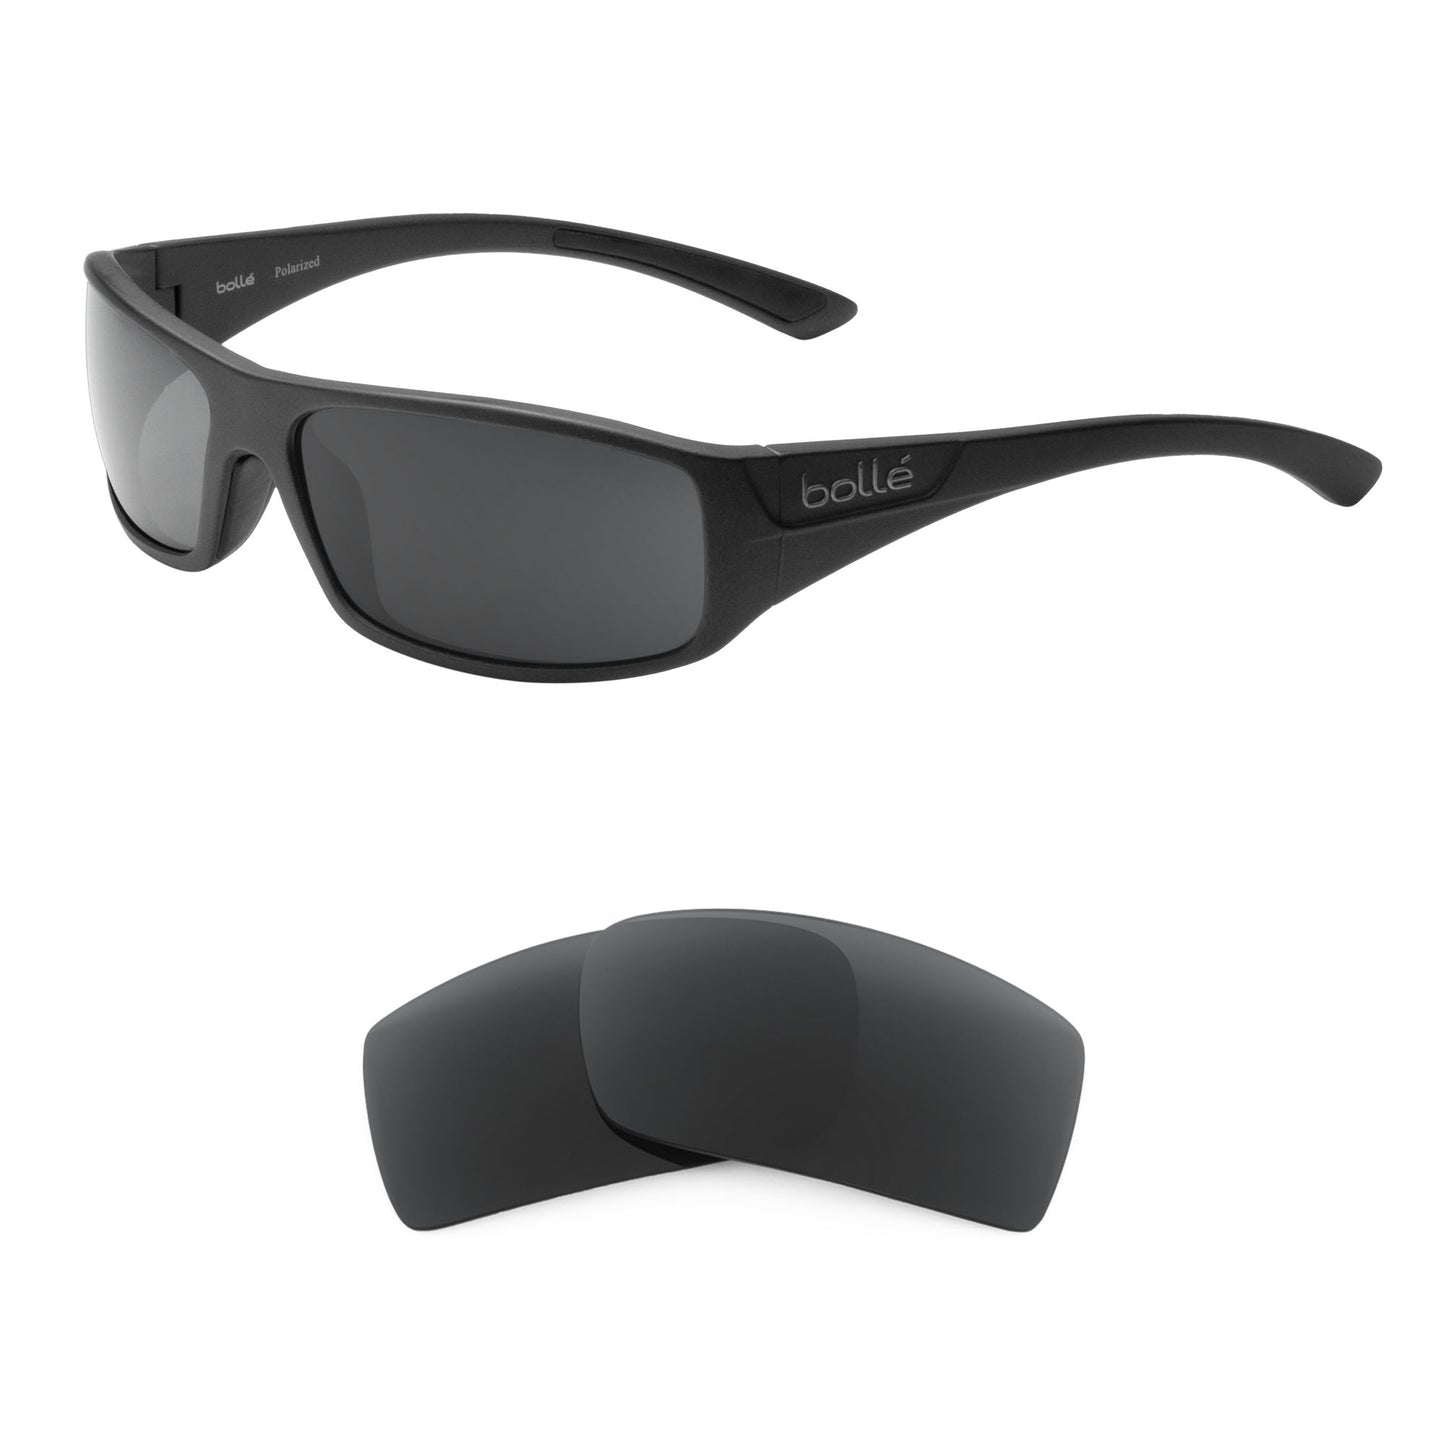 Bolle Weaver sunglasses with replacement lenses